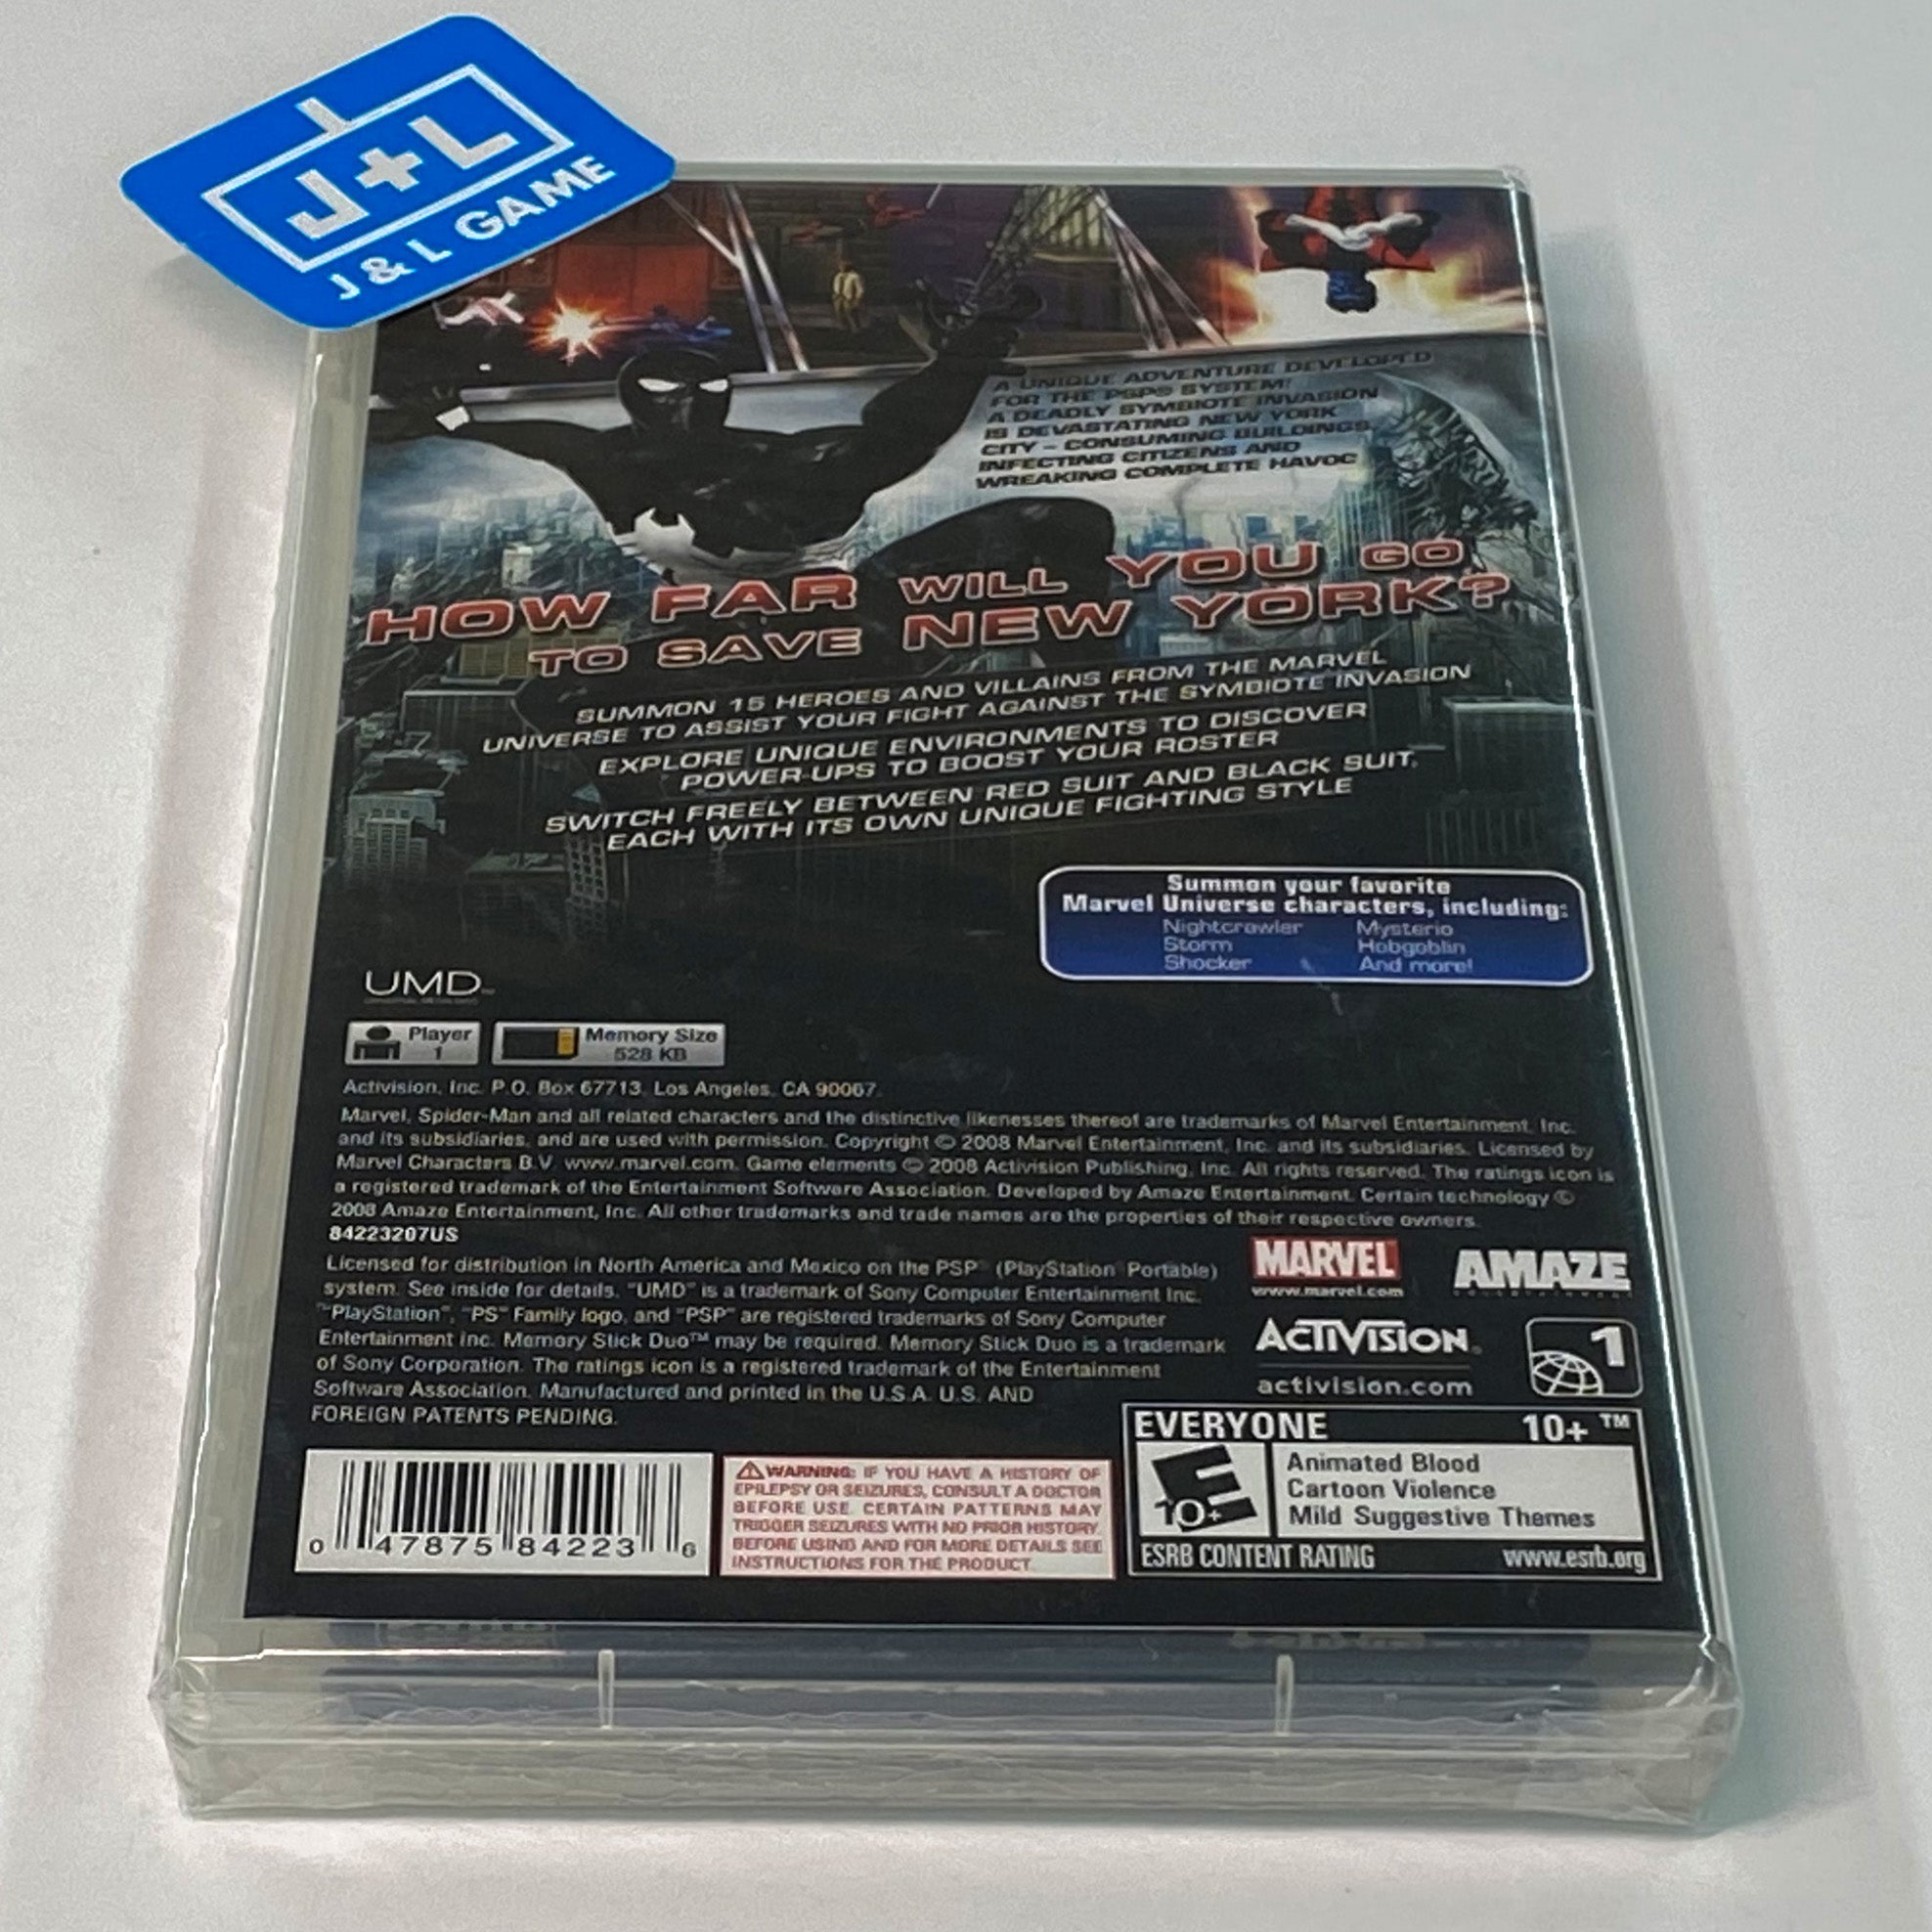 Spider-Man: Web of Shadows (Favorites) - Sony PSP Video Games ACTIVISION   